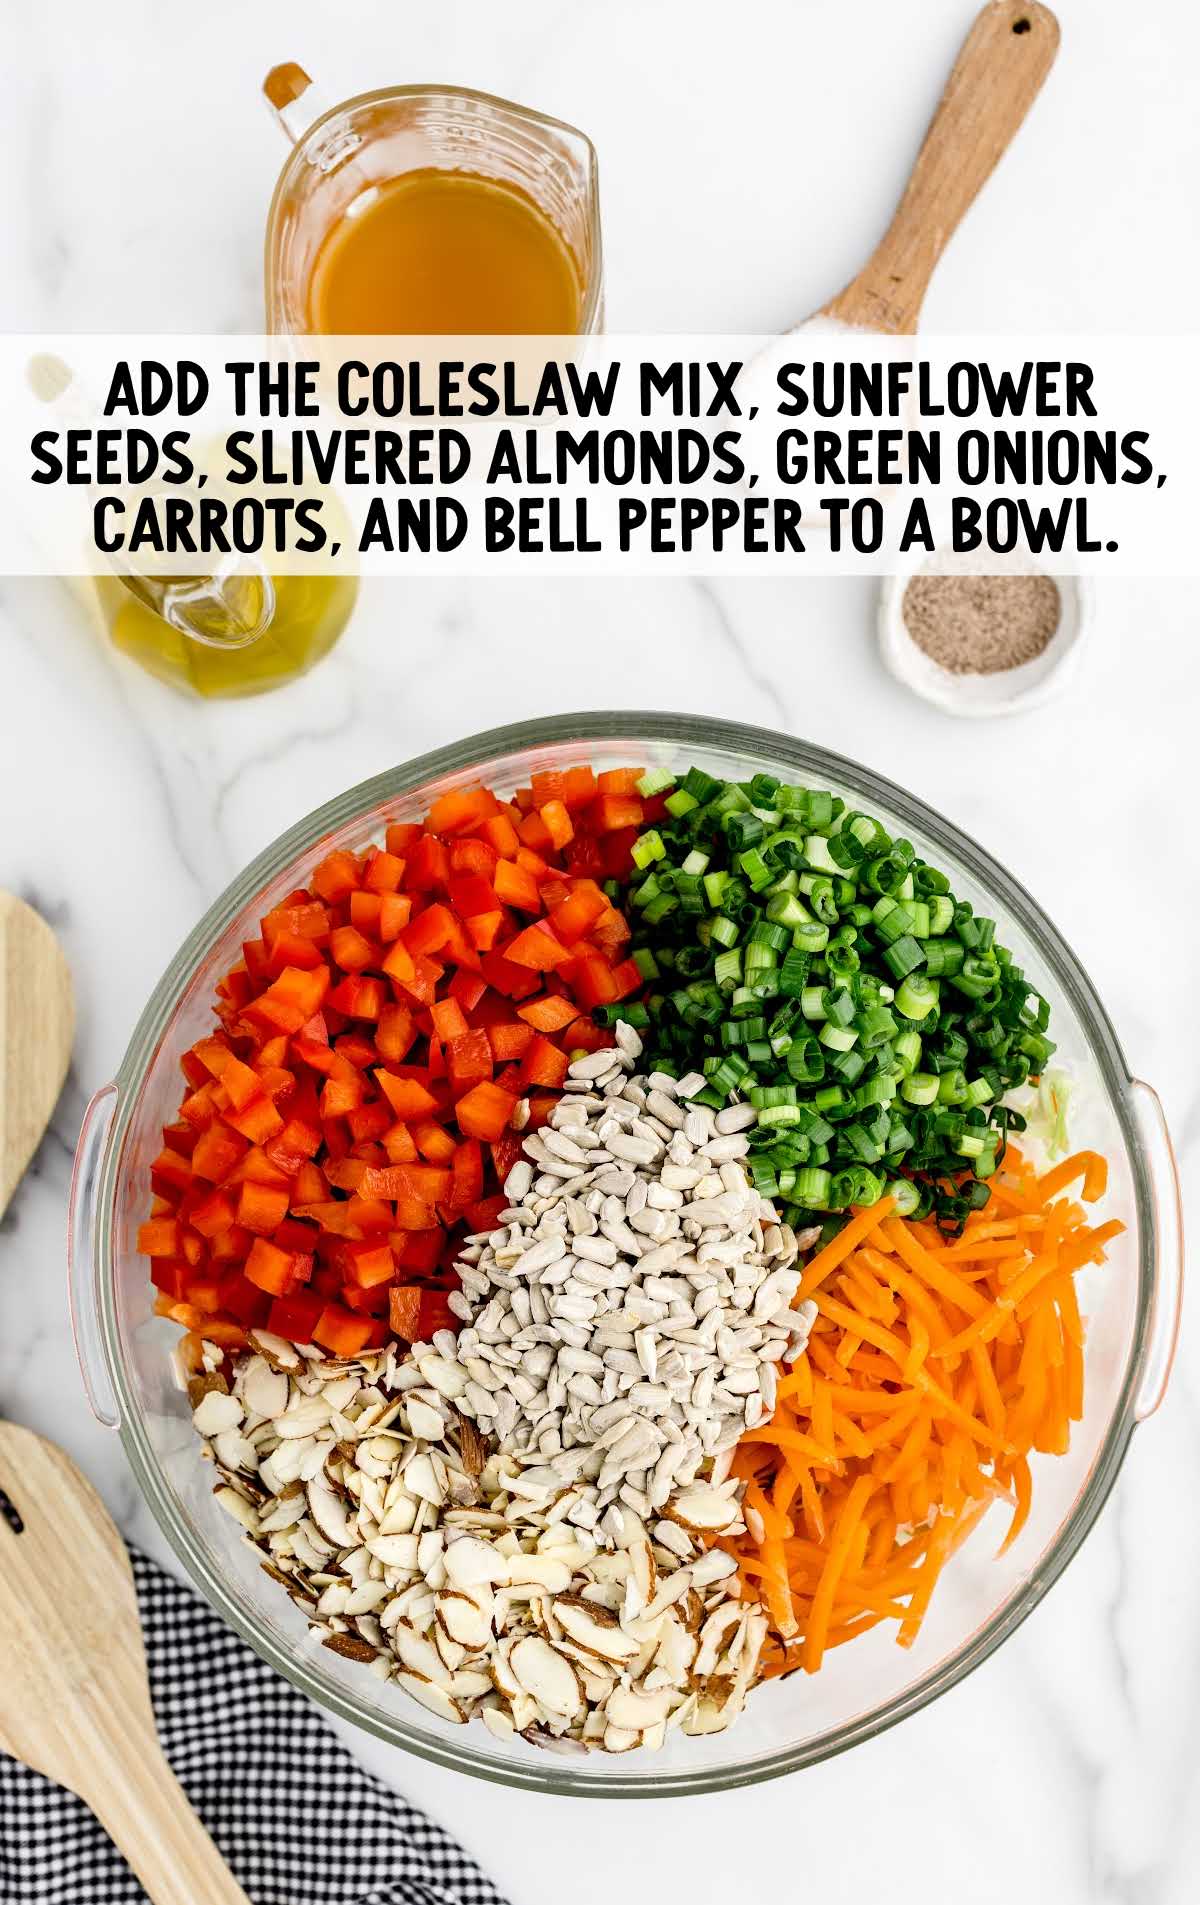 Coleslaw mix, sunflower seed, almonds, green onions, carrots, and bell peppers combined together